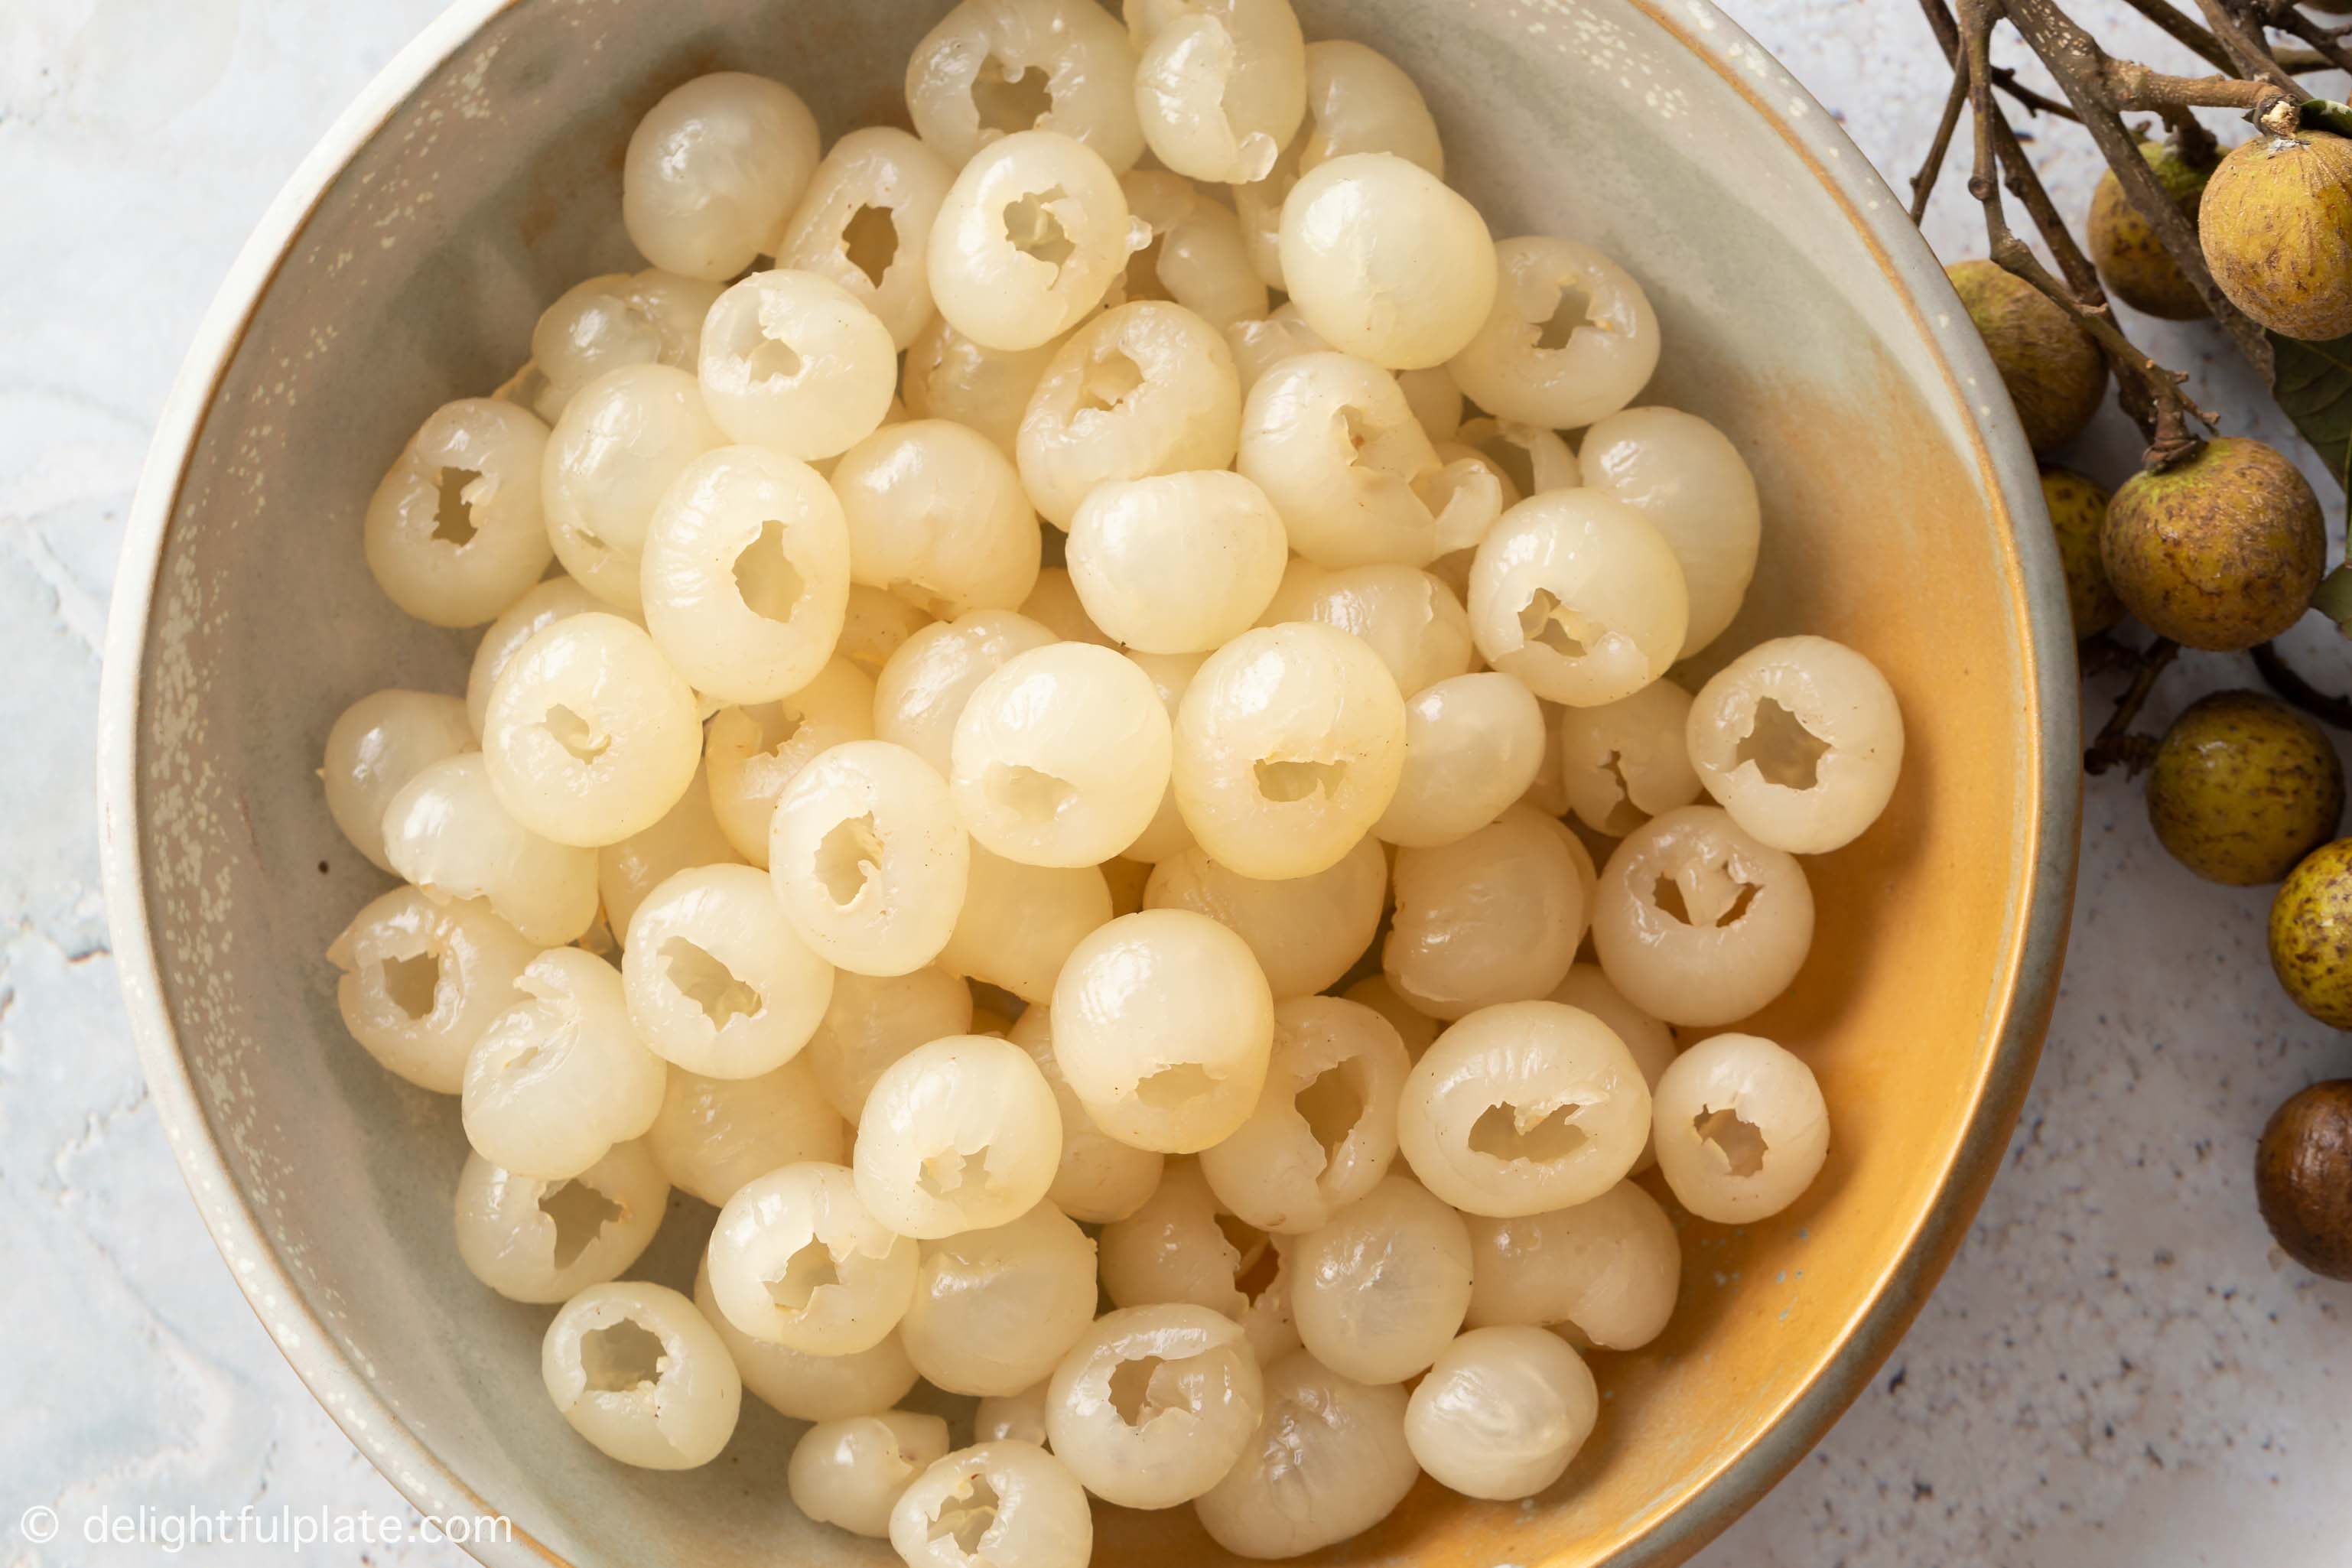 a plate with flesh of longan fruits